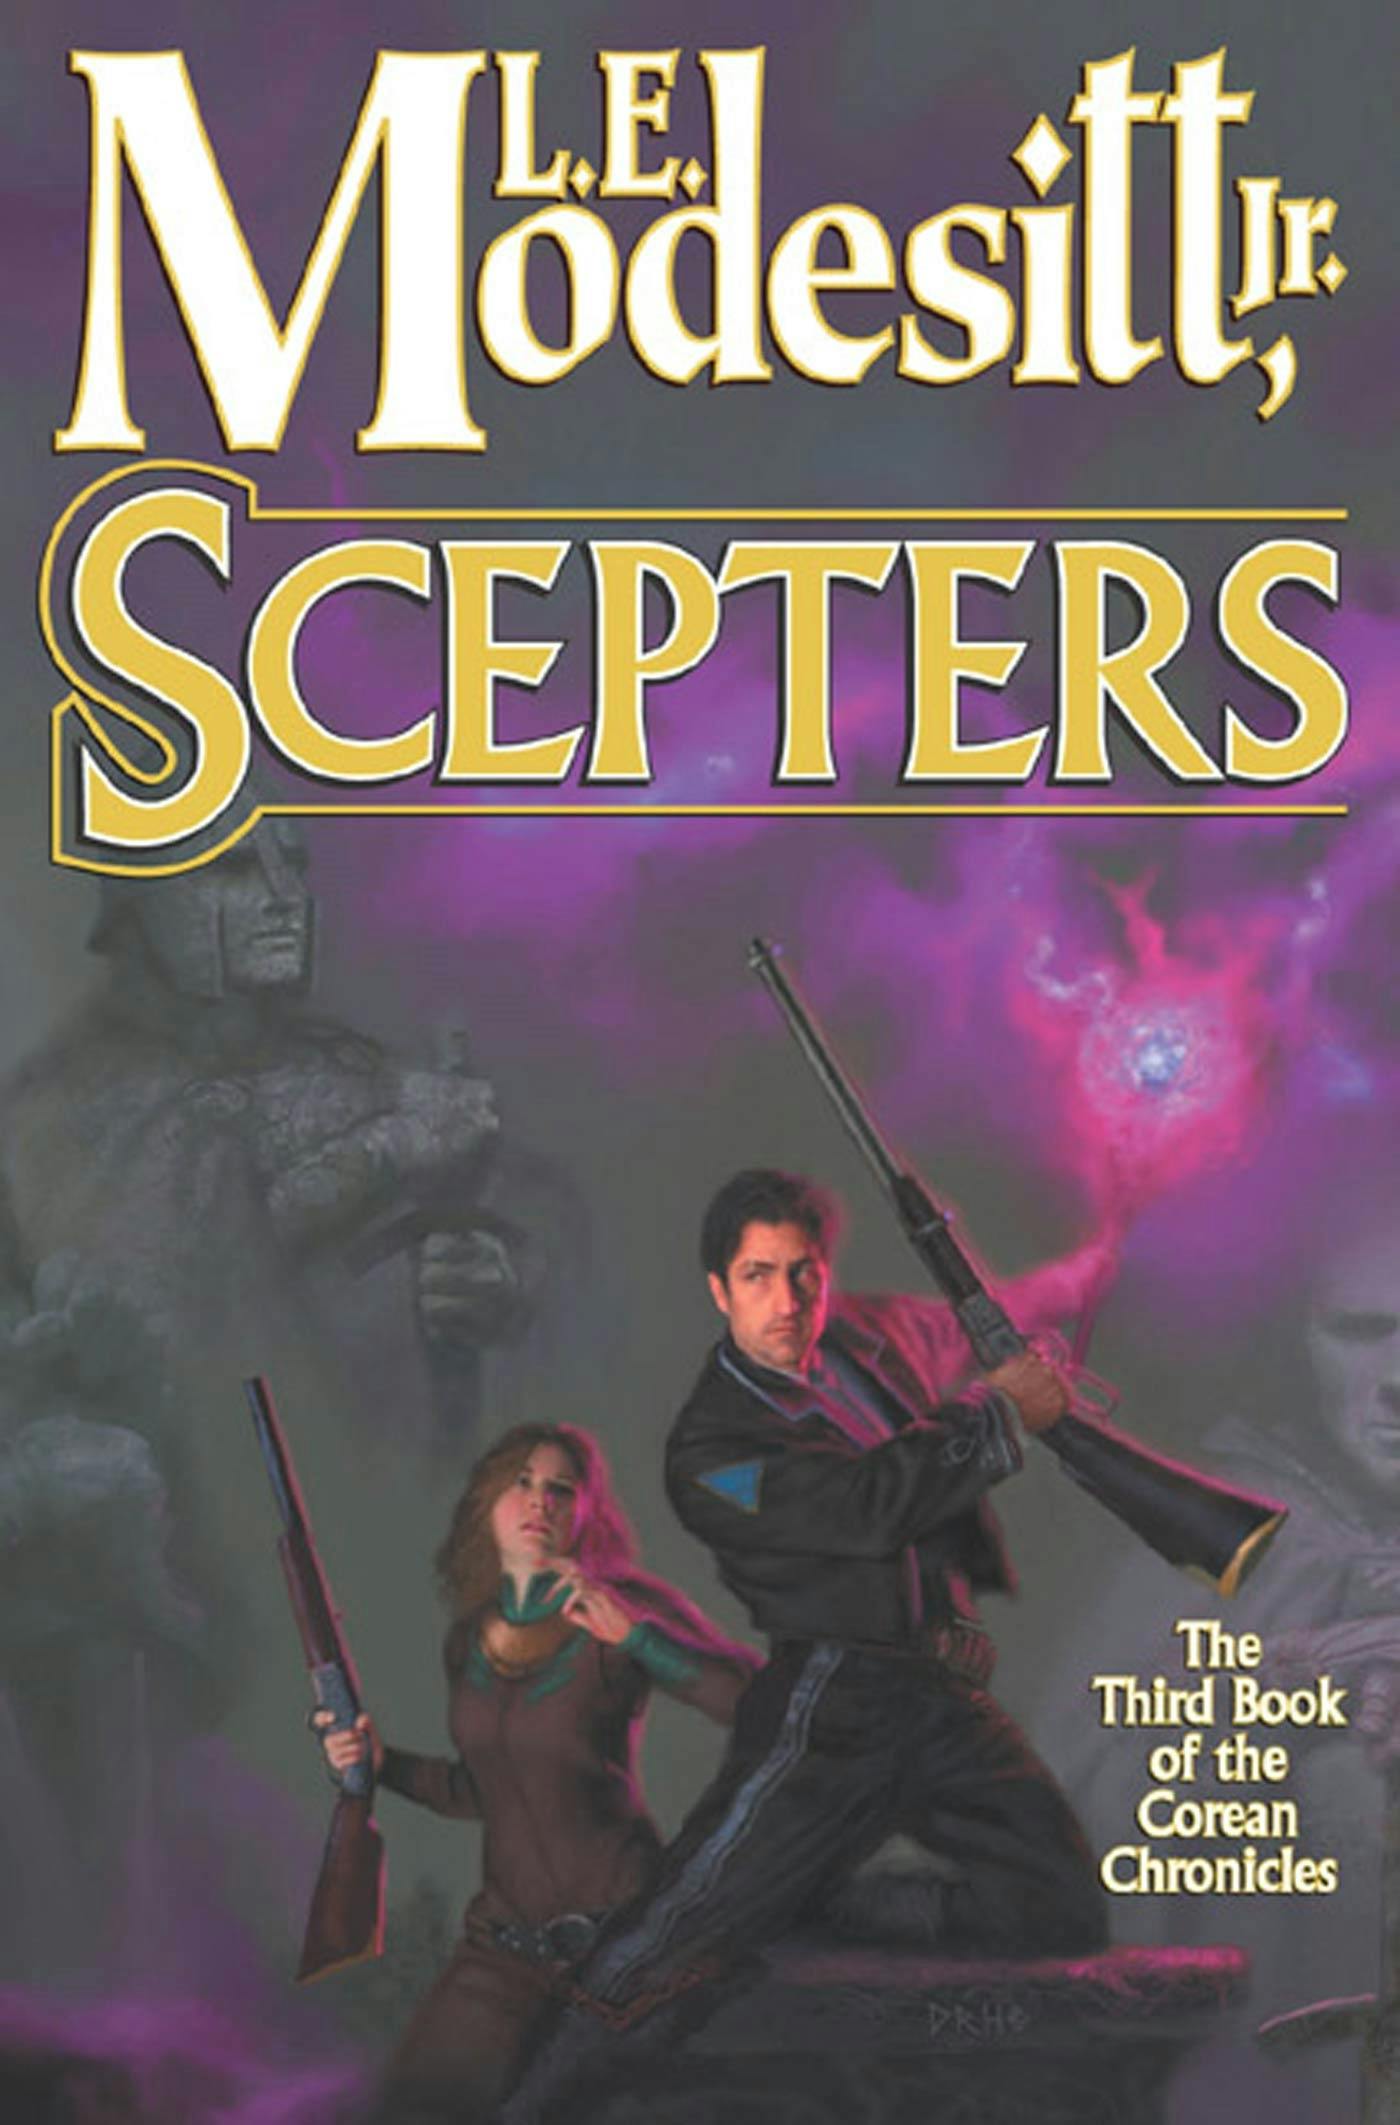 Cover for the book titled as: Scepters